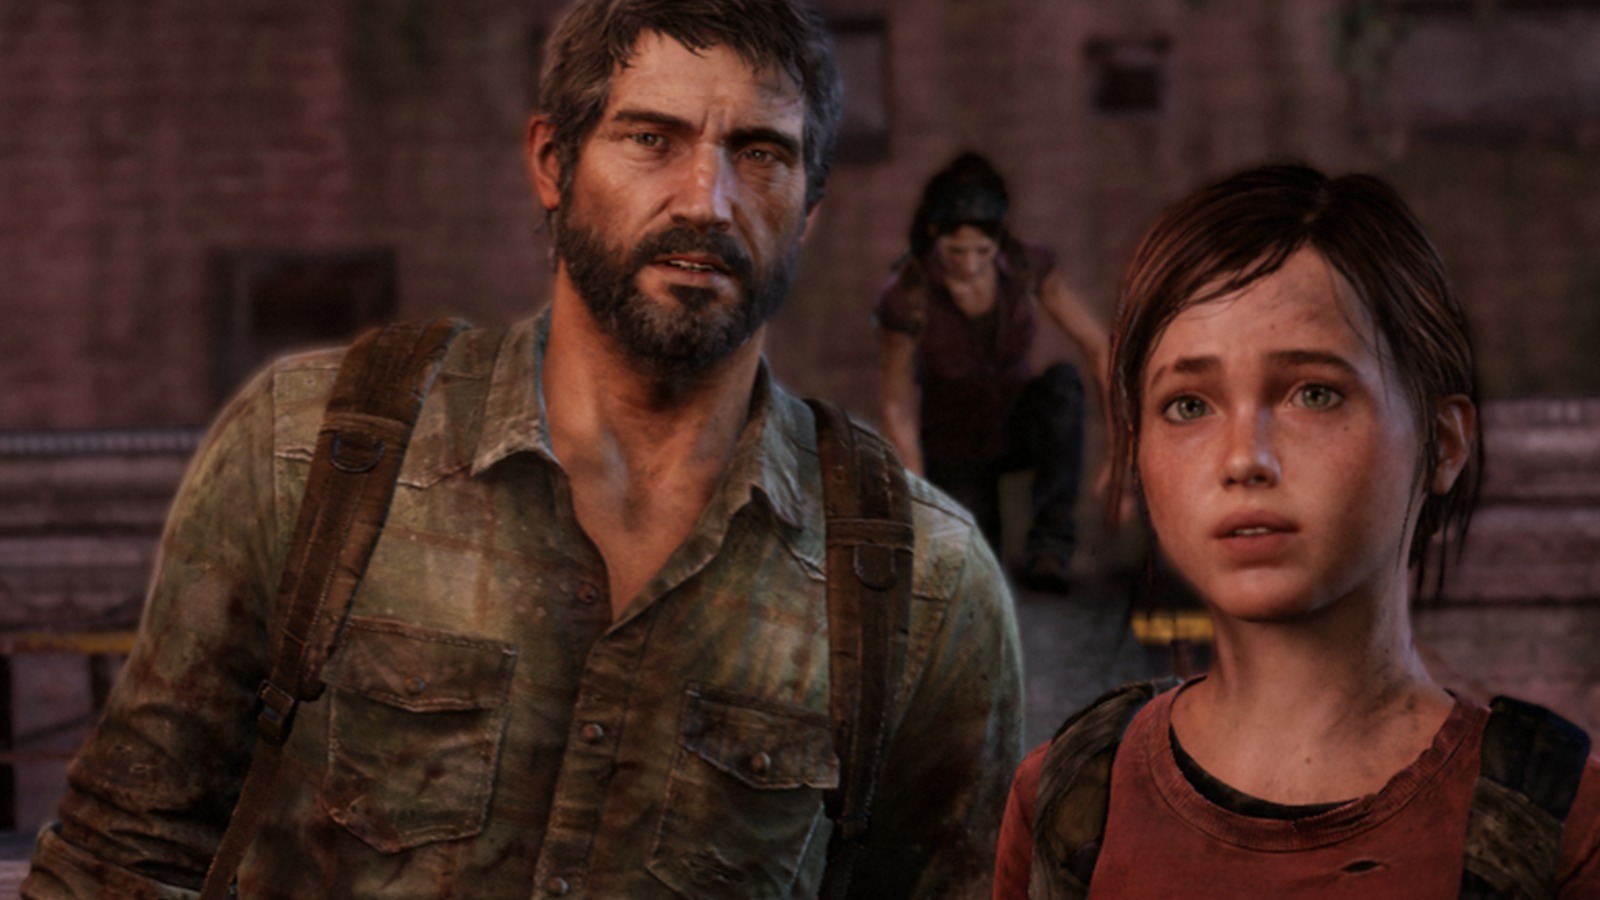 #The Last Of Us Voice Actors Troy Baker And Ashley Johnson To Have Roles In The HBO Series